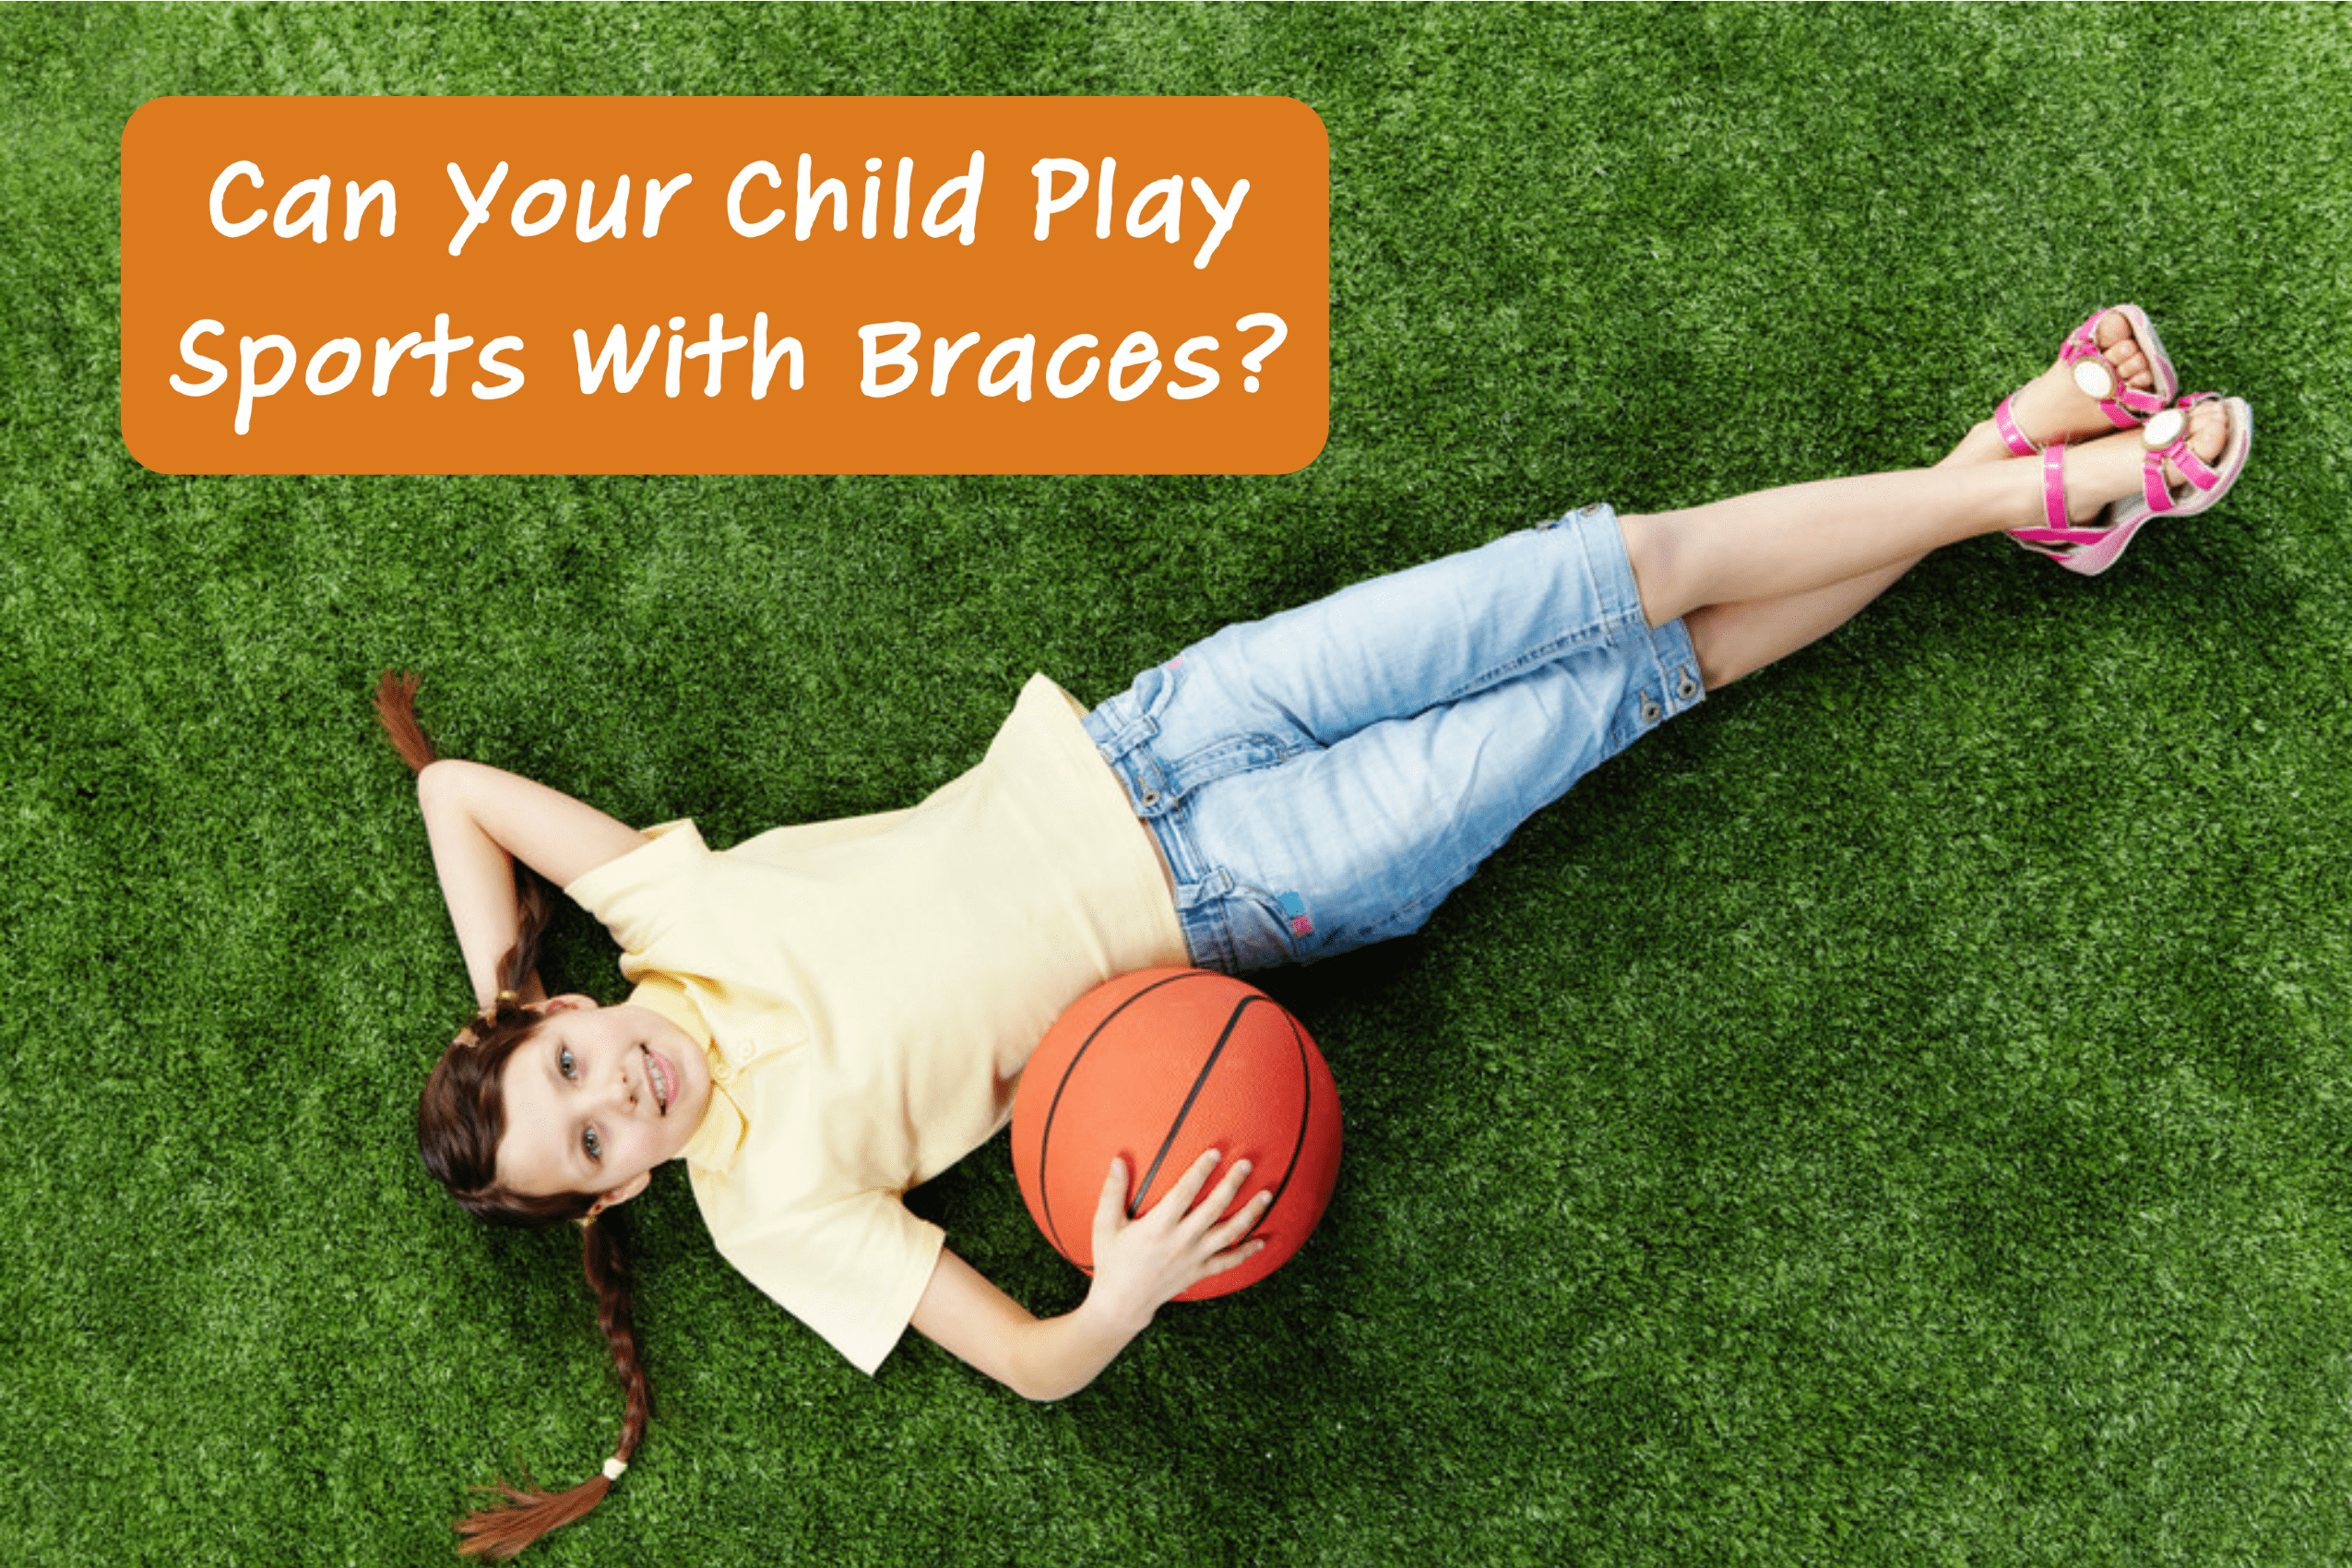 Can Your Child Play Sports With Braces?